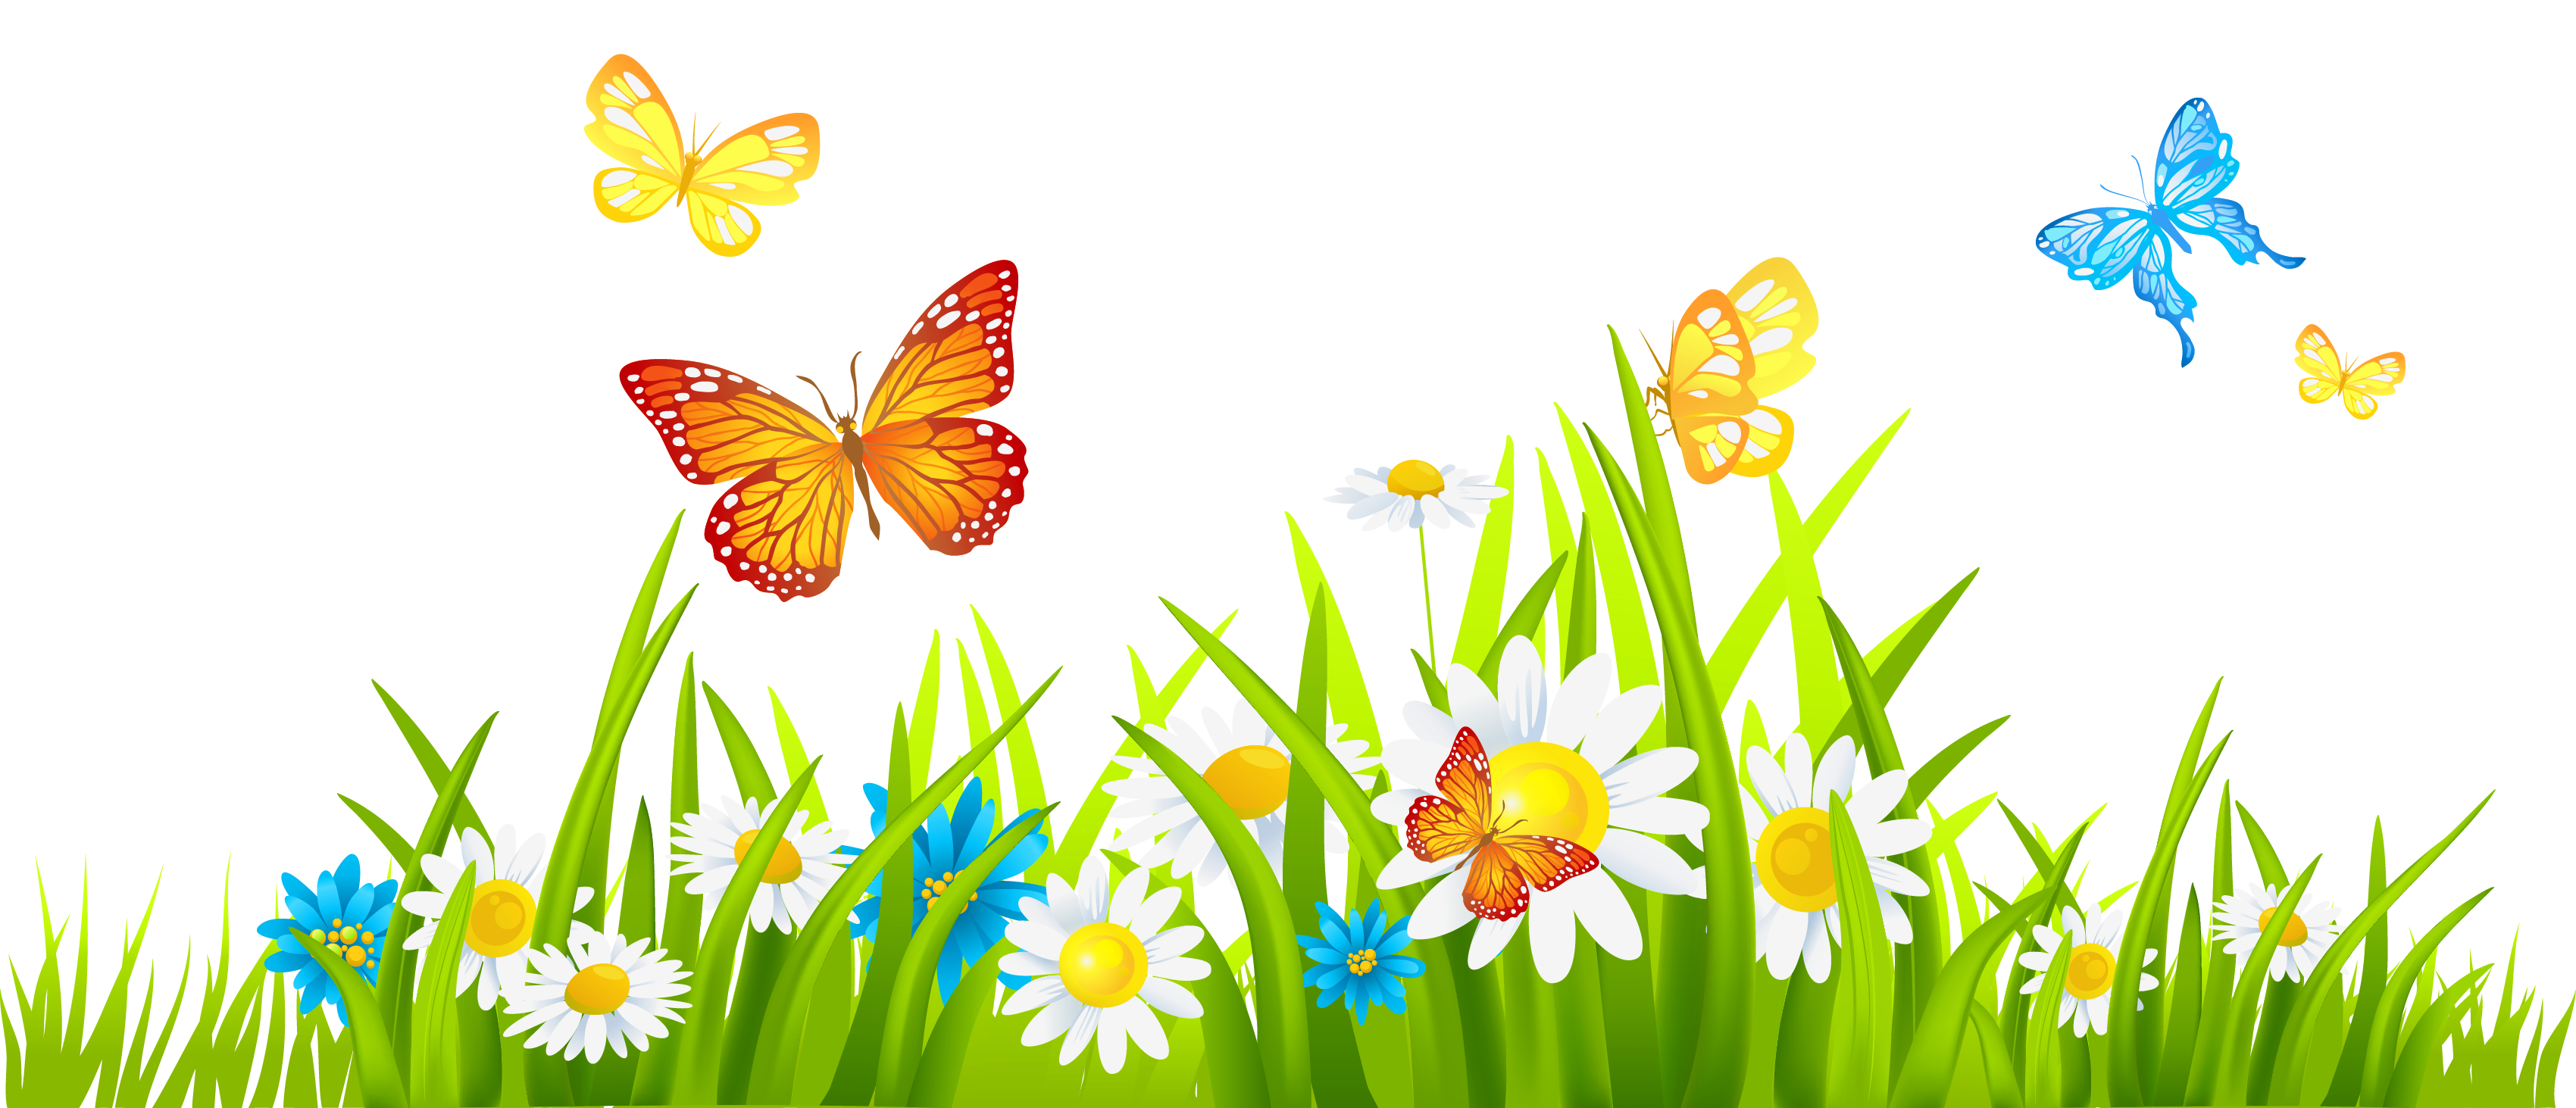 Grass and flowers clip art free clipart images clipartwiz